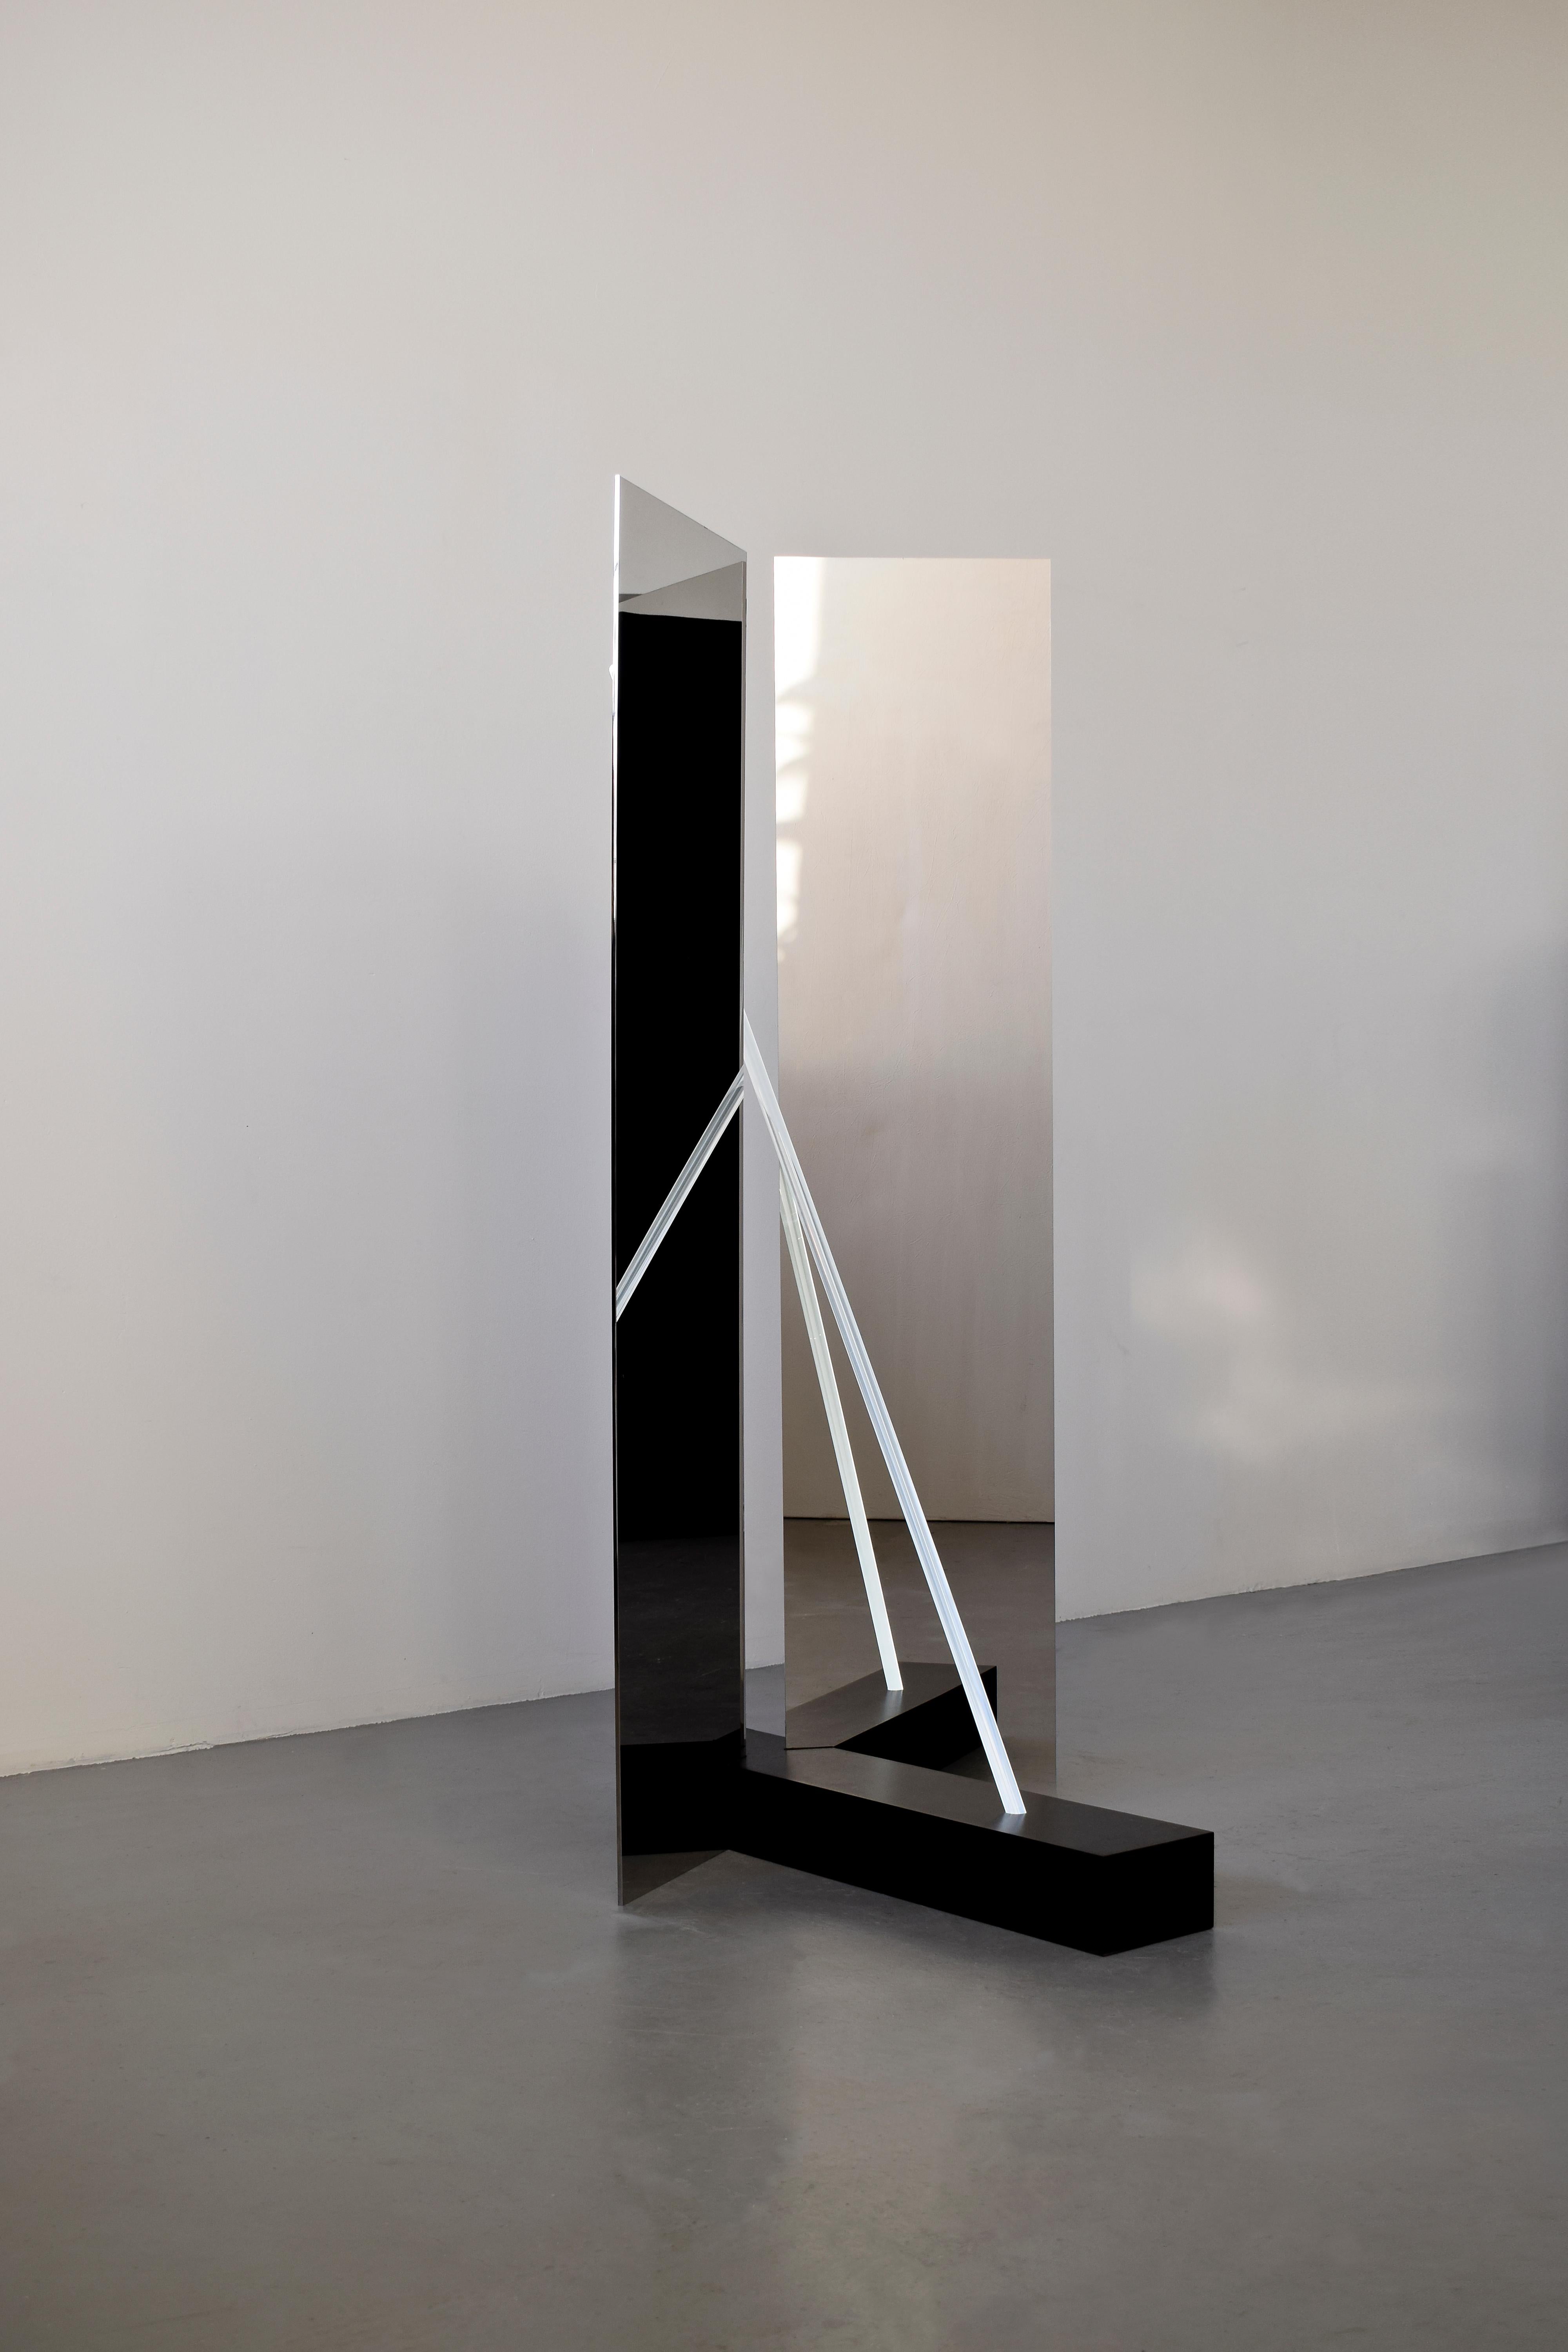 Sculptural enlightened mirror, Maximilian Michaelis

Title: The elusive nature of perception, No. 04

Measures: 63 x 155 x 105 cm

Material: polished stainless steel, belgian bluestone, arcylic glas, Led

The basis and inspiration for